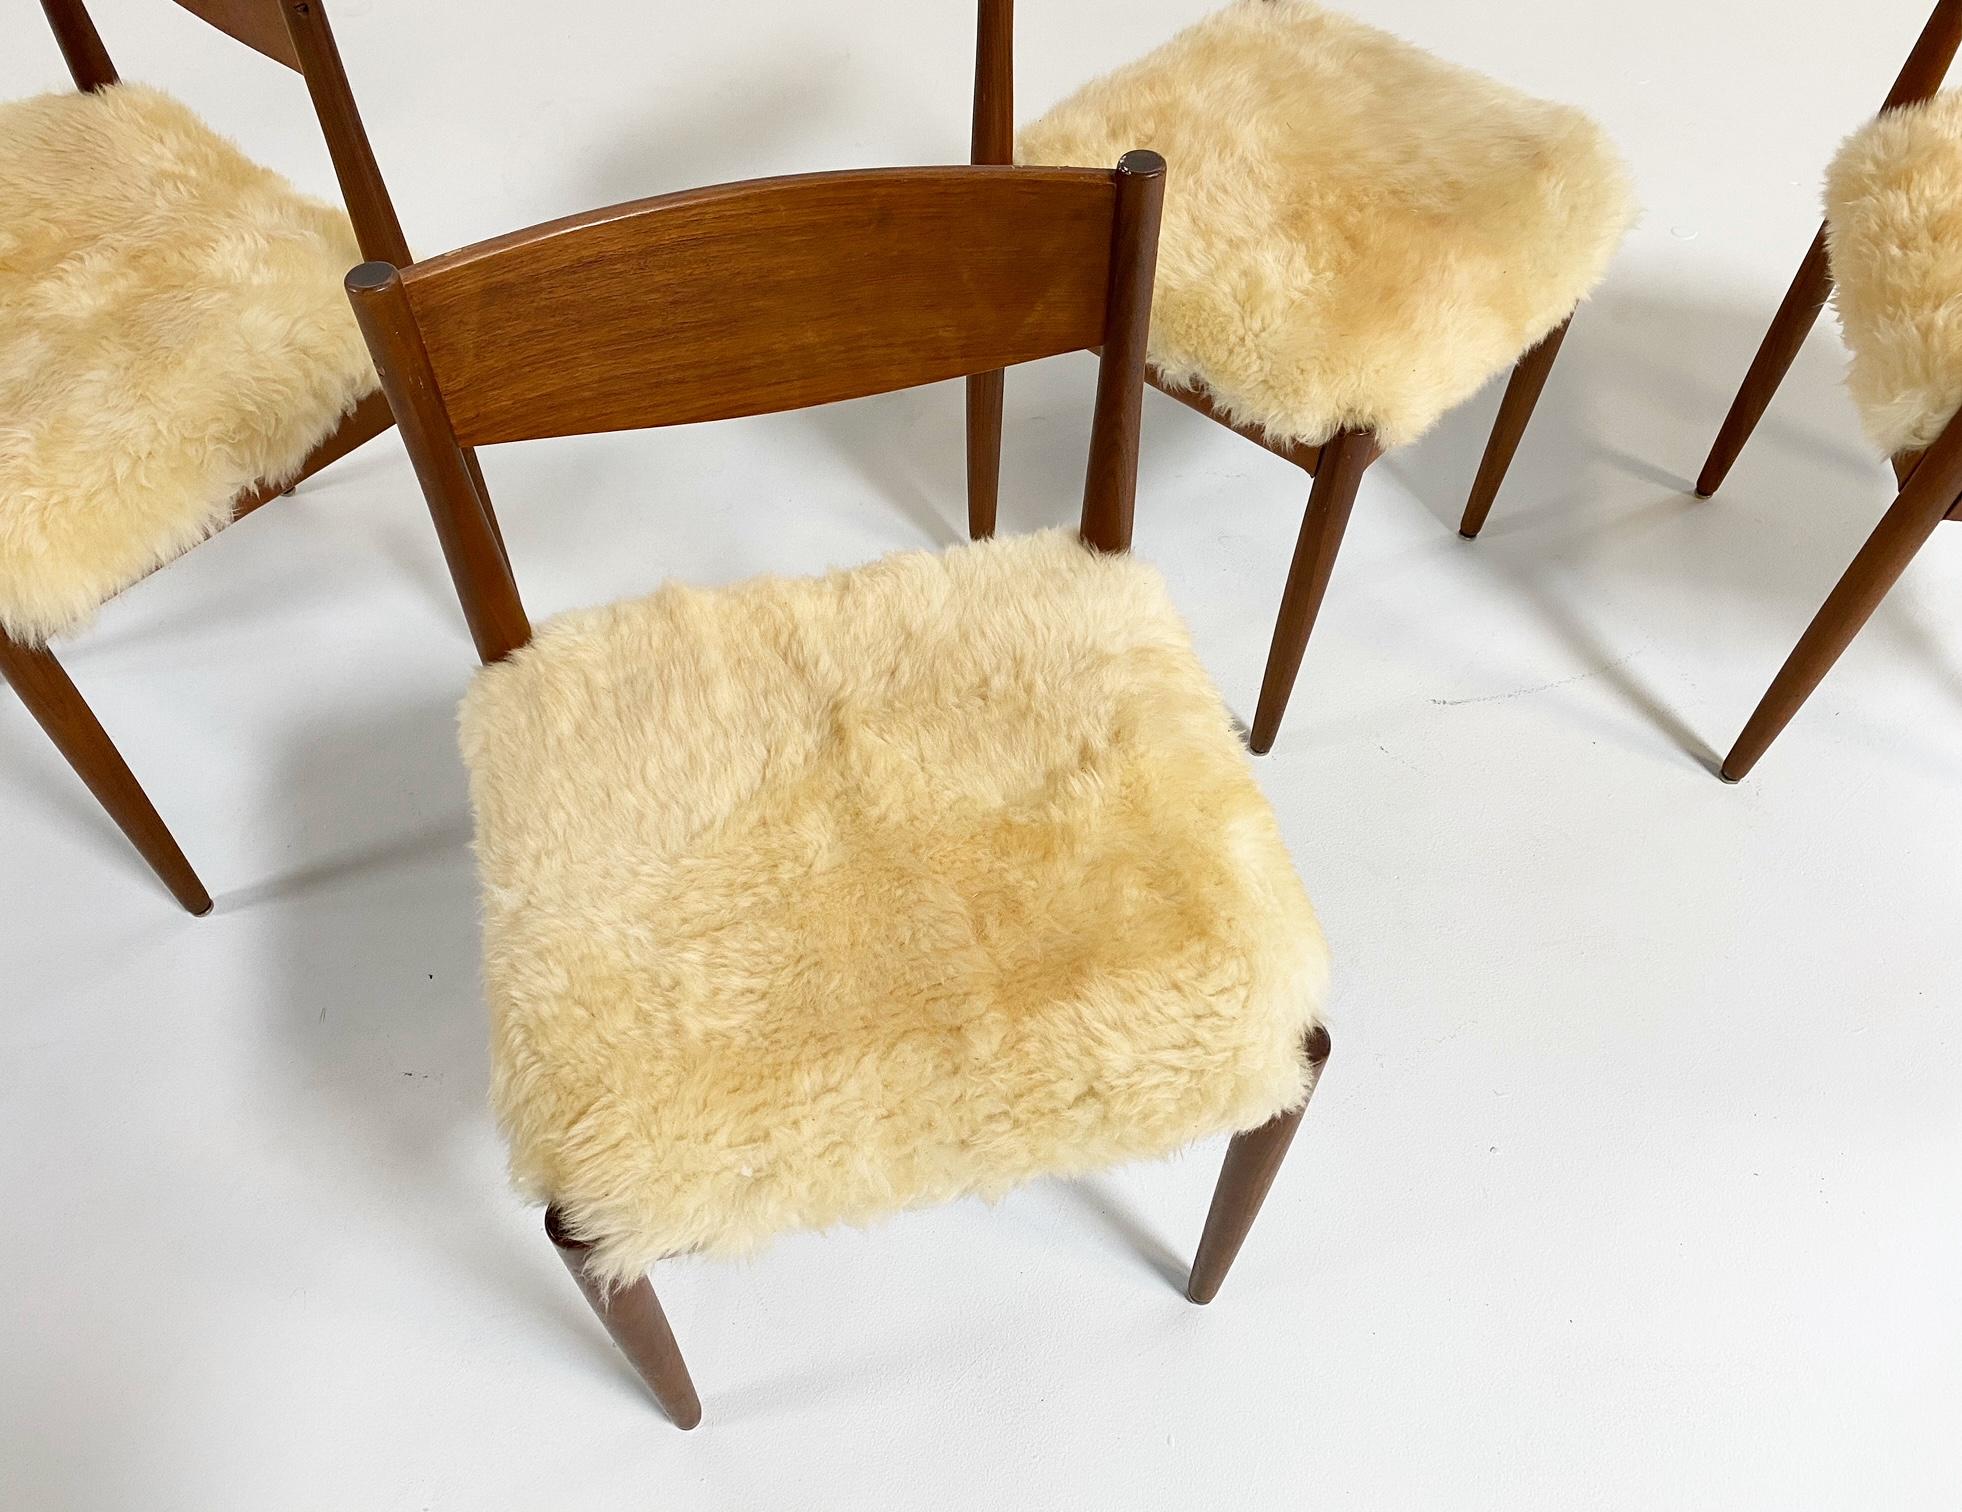 The classic Danish dining chair. These originally had the Danish cording on the seats but it was all way too far gone to save. So we added sheepskin instead! This is such a simple yet modern frame. The sheepskin is our cozy, low-pile Texas sheepskin